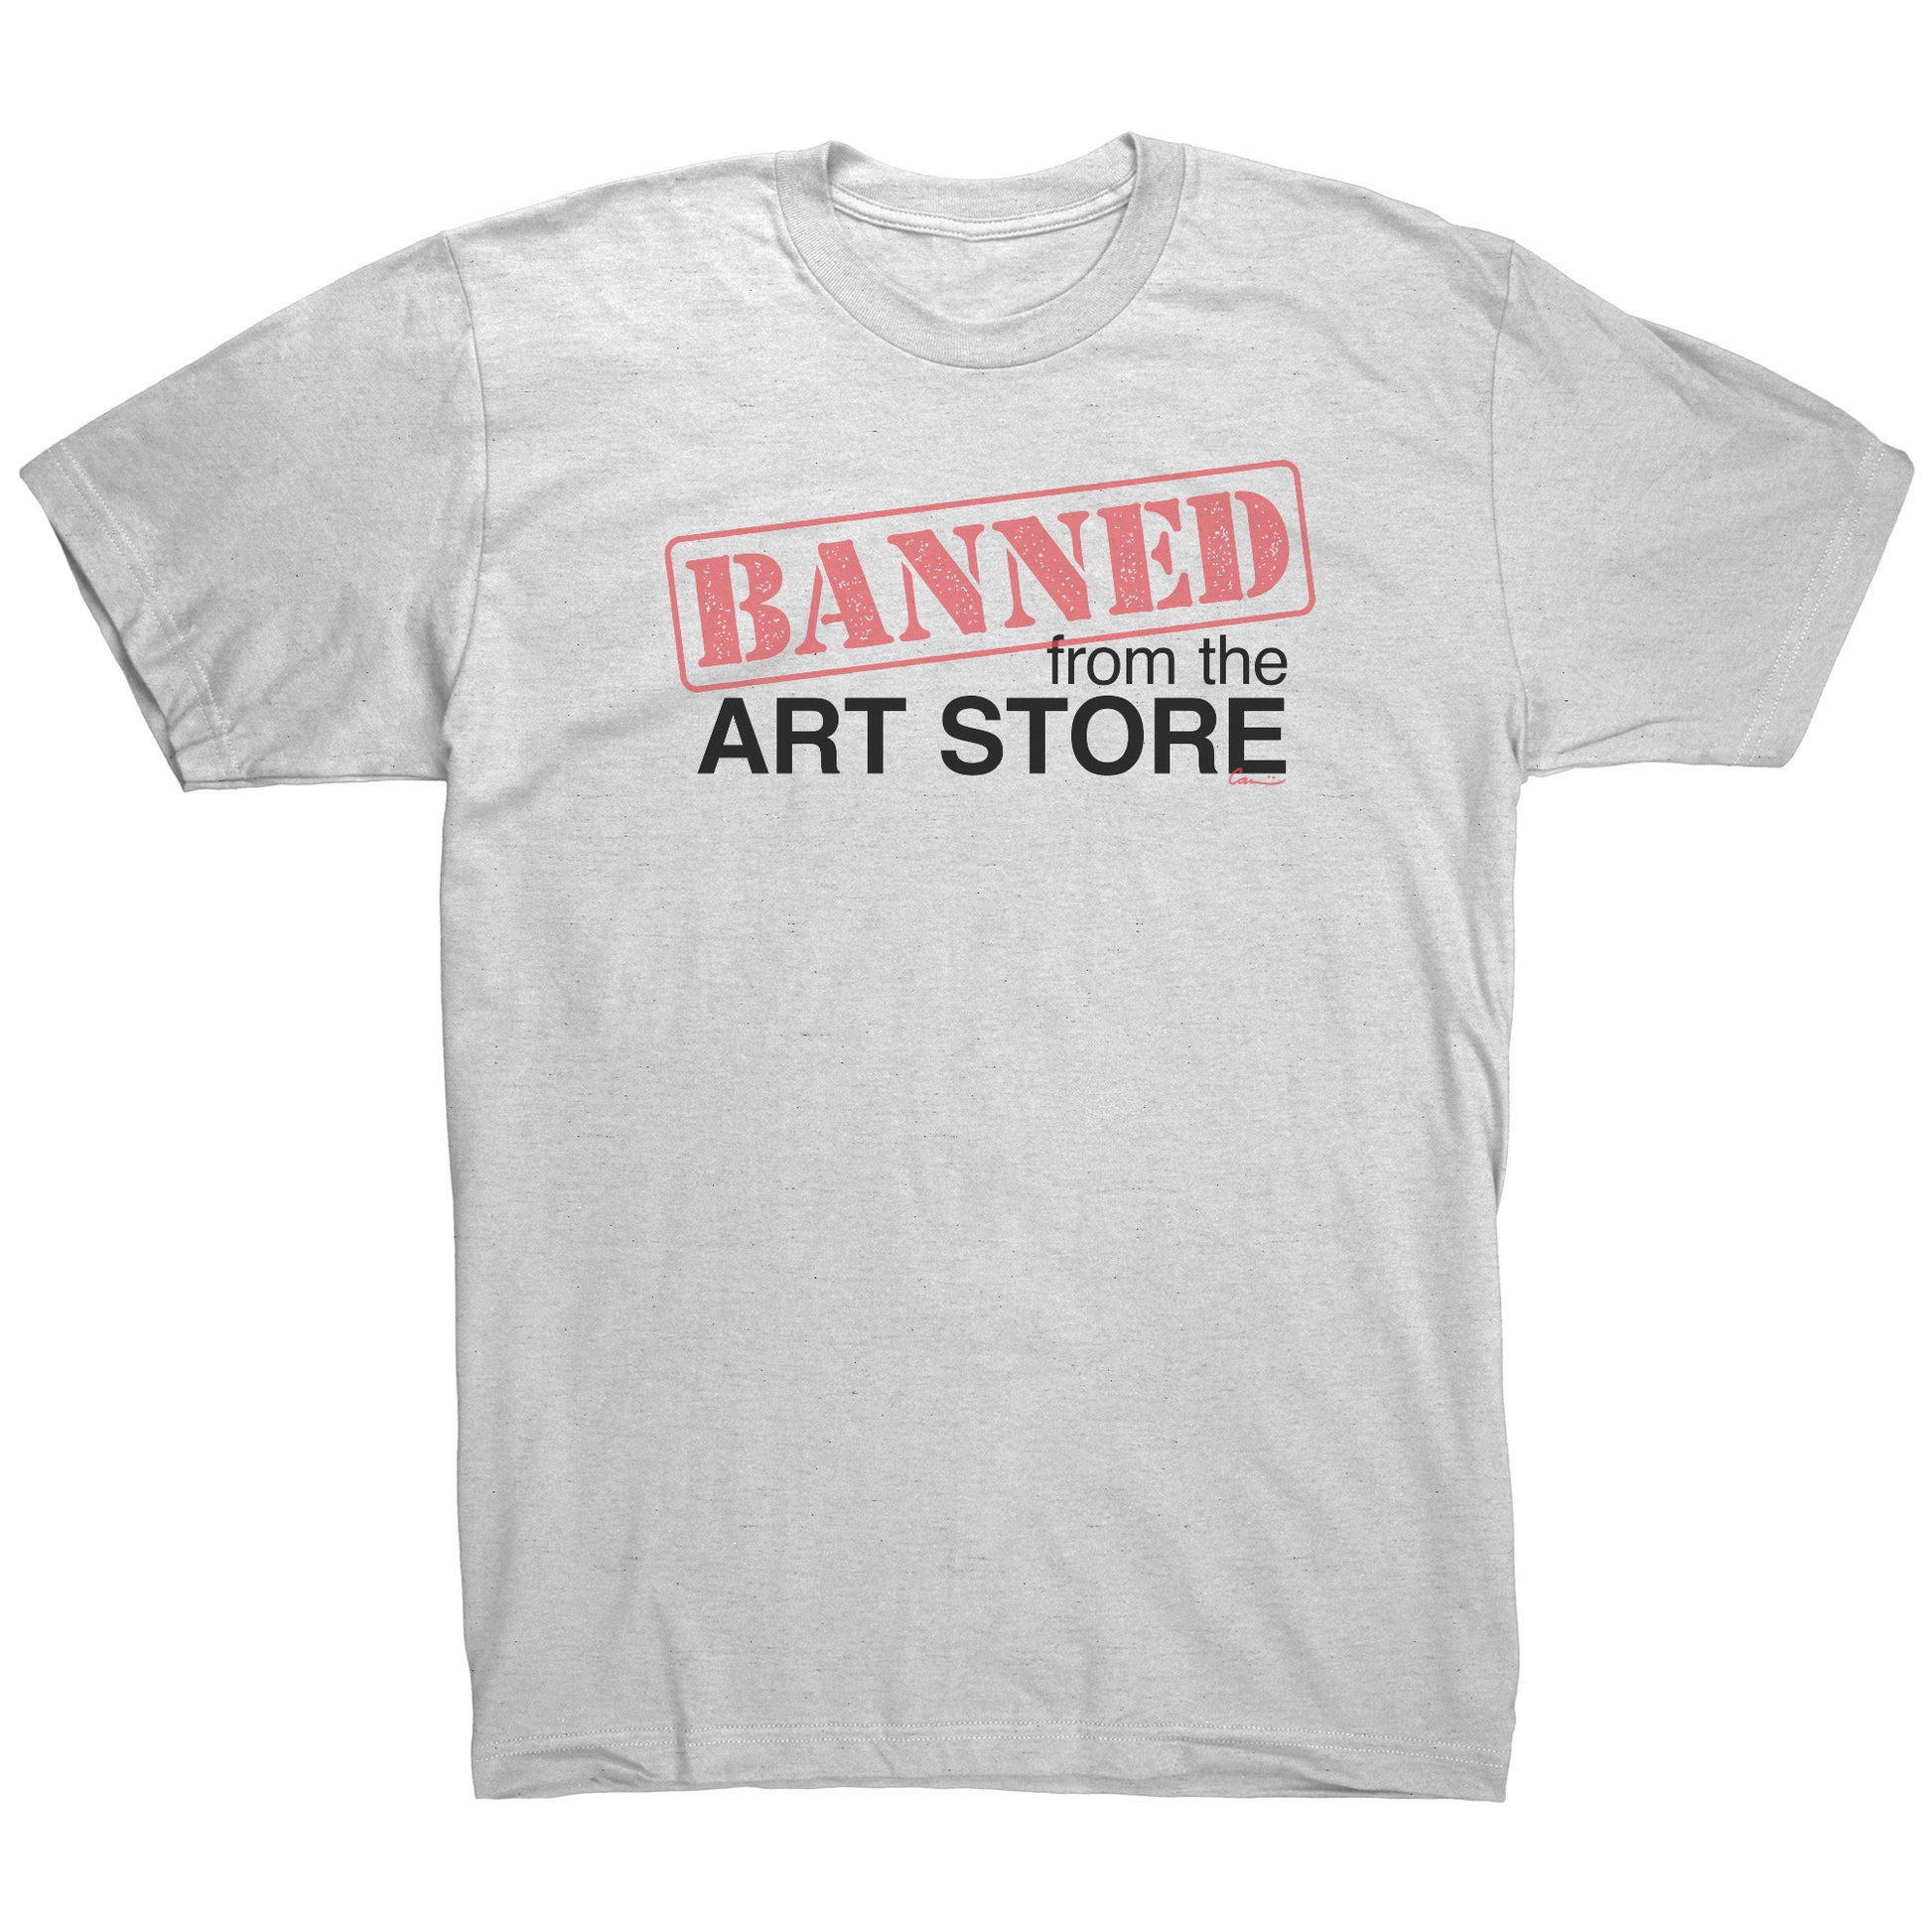 White or ash grey t-shirt with red and black print saying Banned from the Art Store.